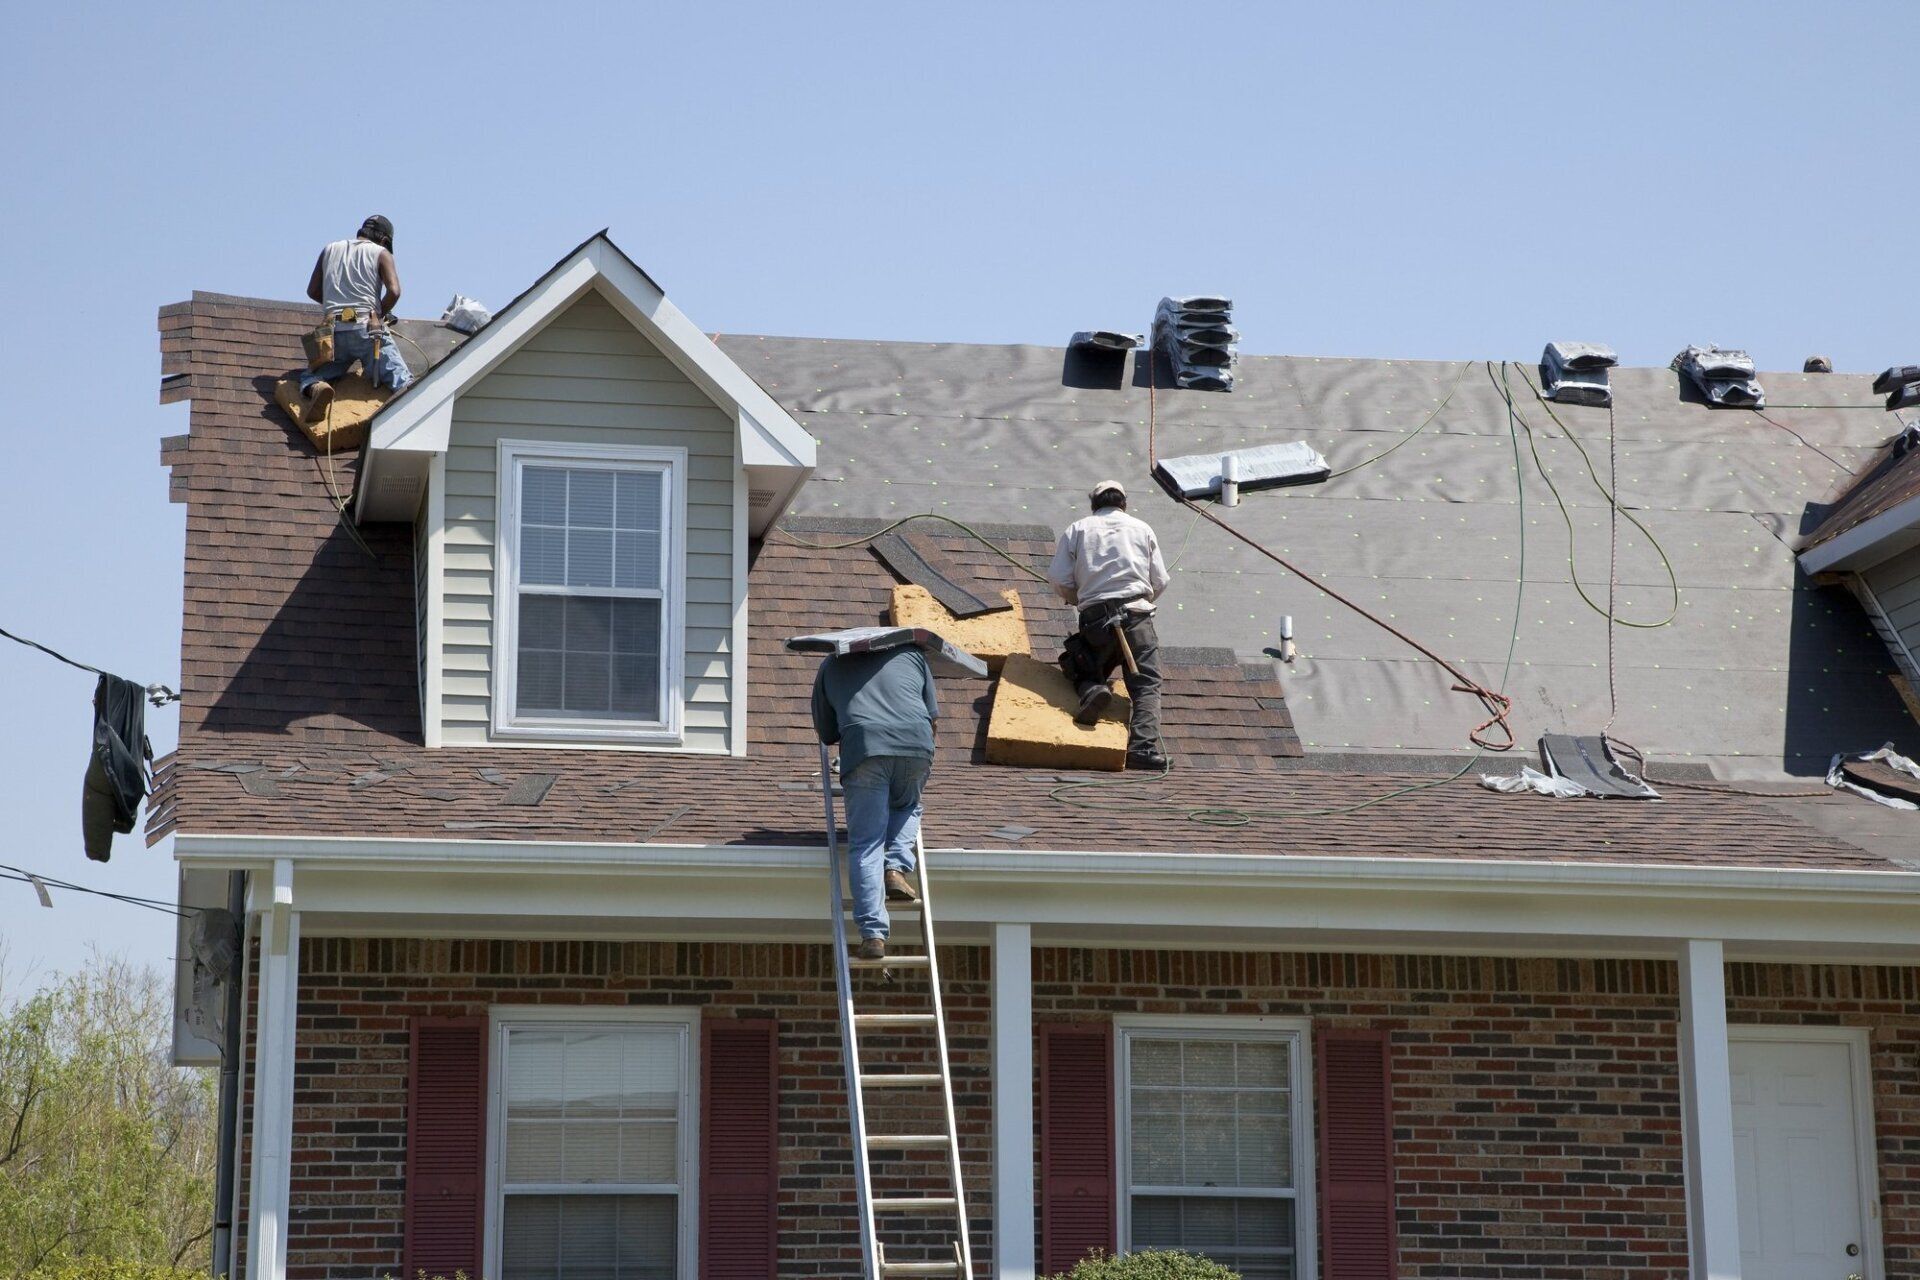 How Much Does a Roof Replacement Cost? The Homeowner's Guide to a New Roof.